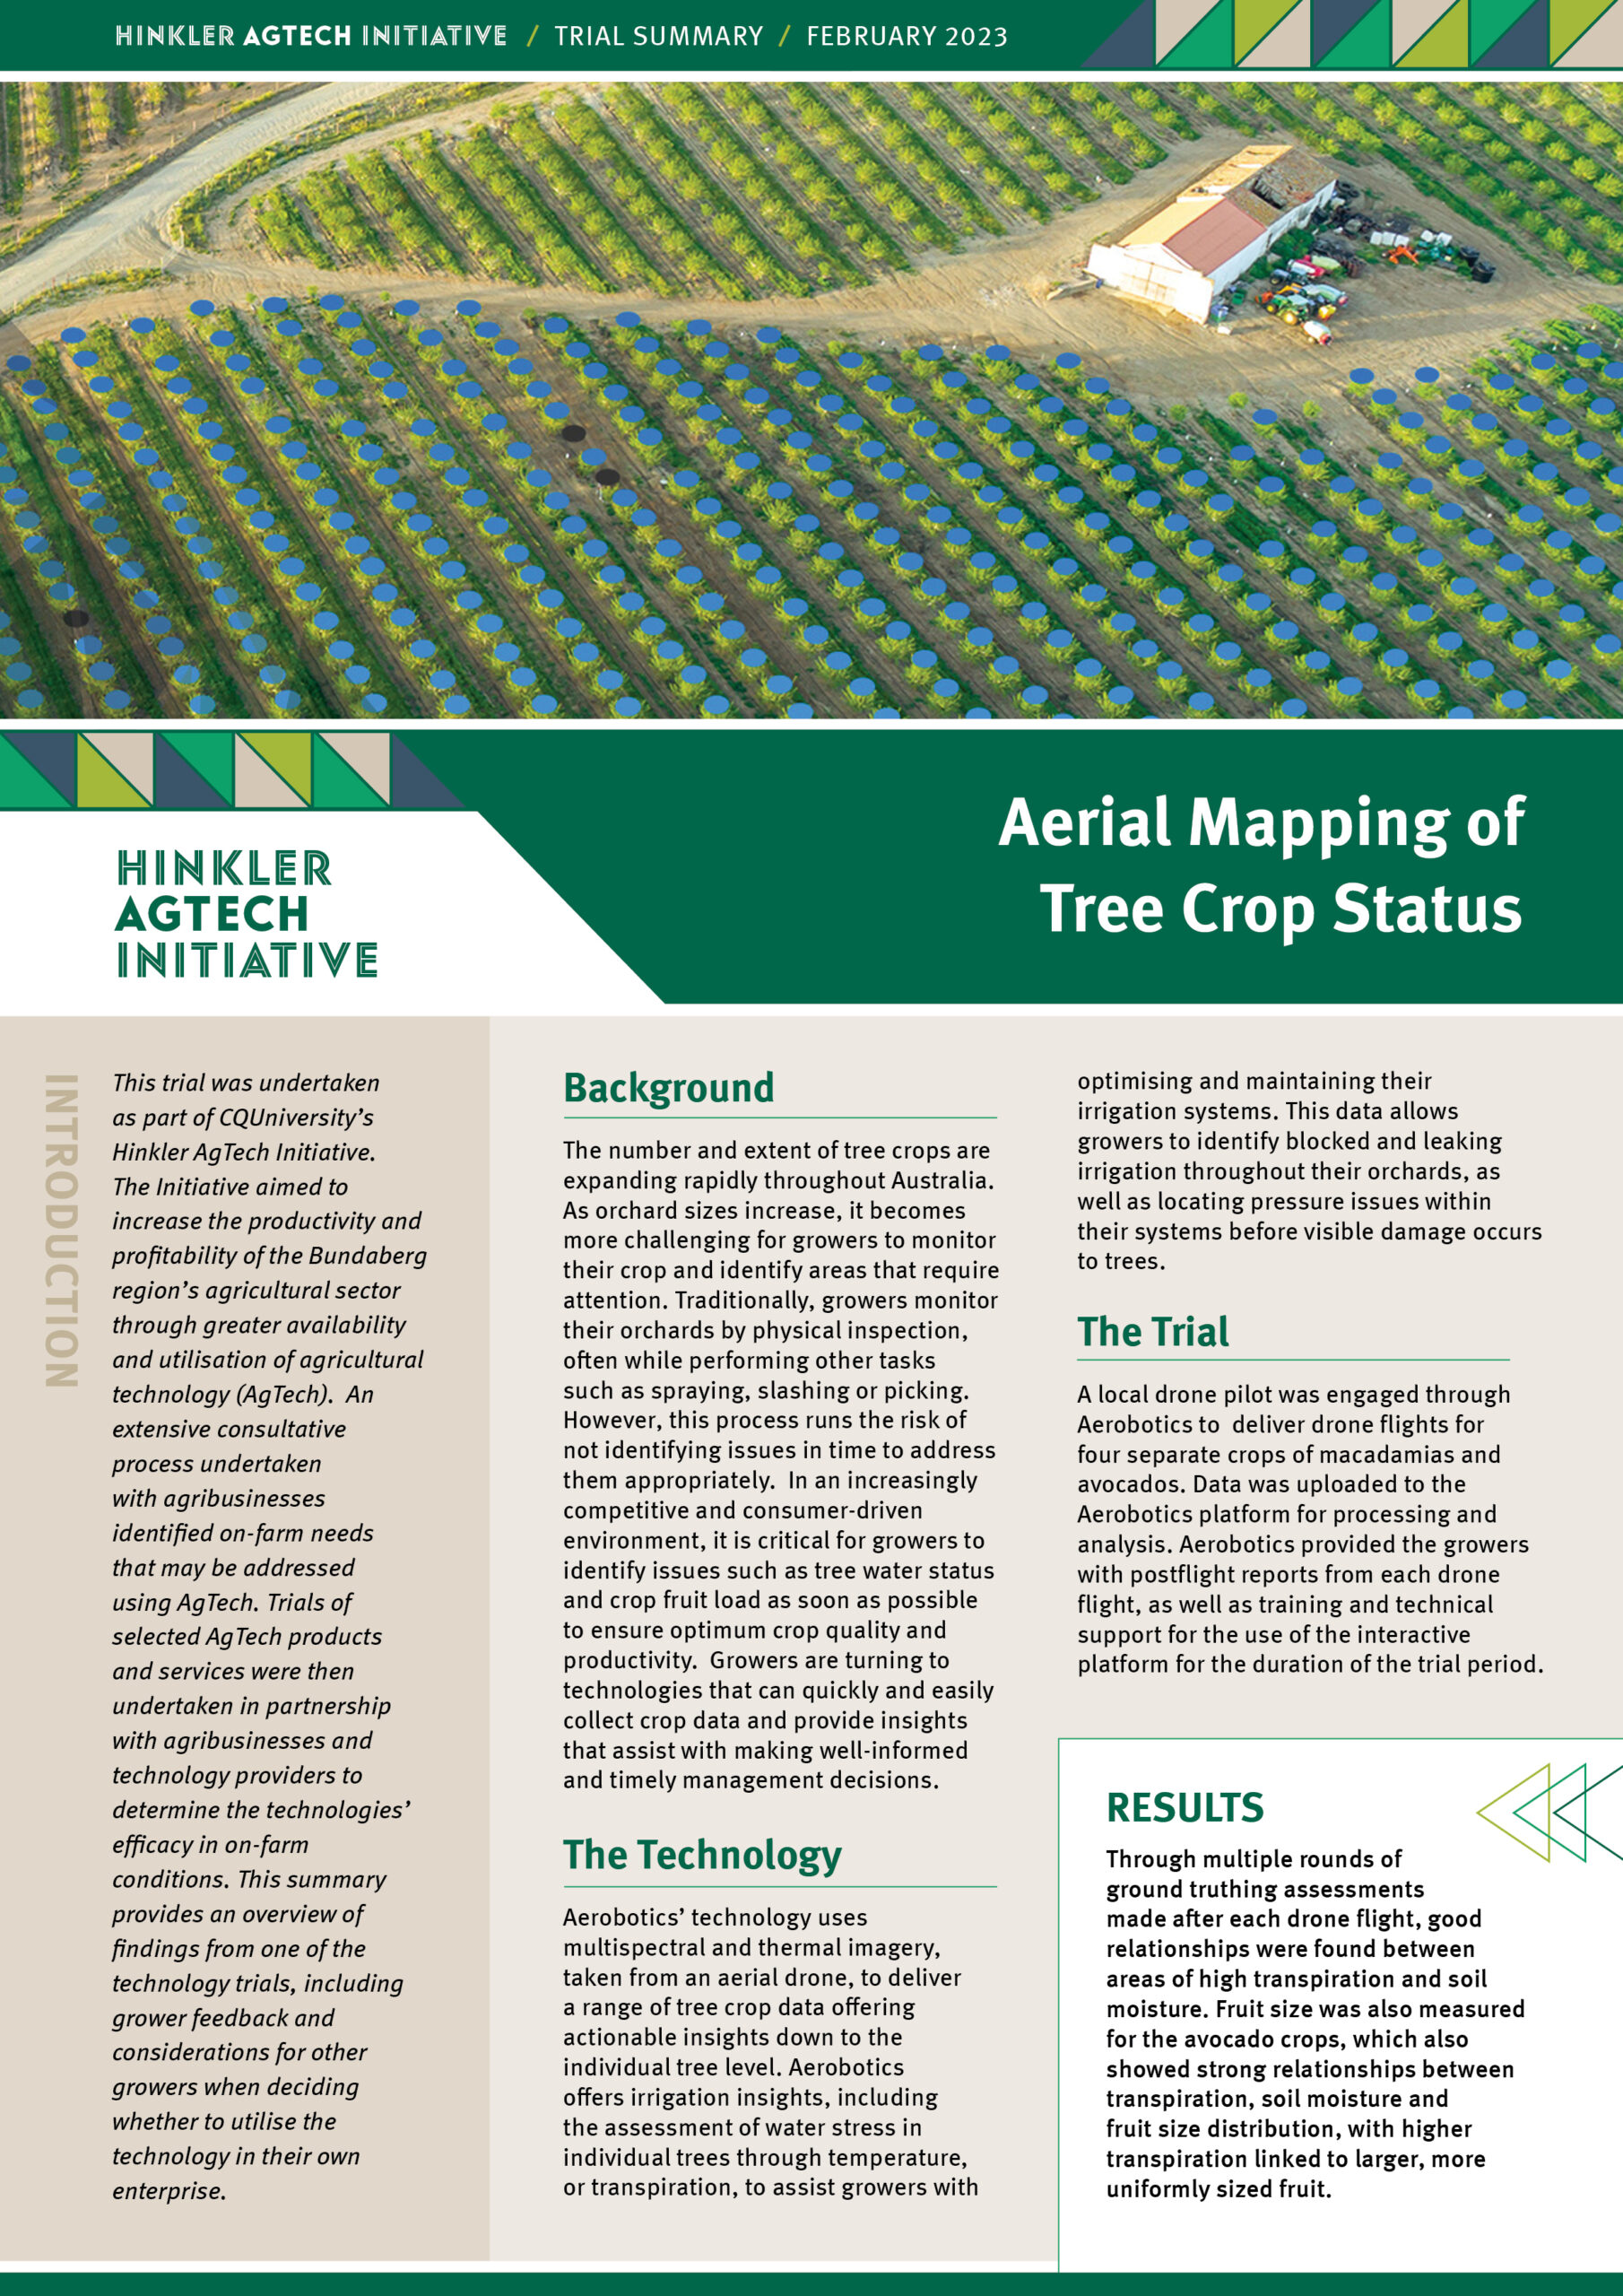 Aerial Mapping of Tree Crop Status